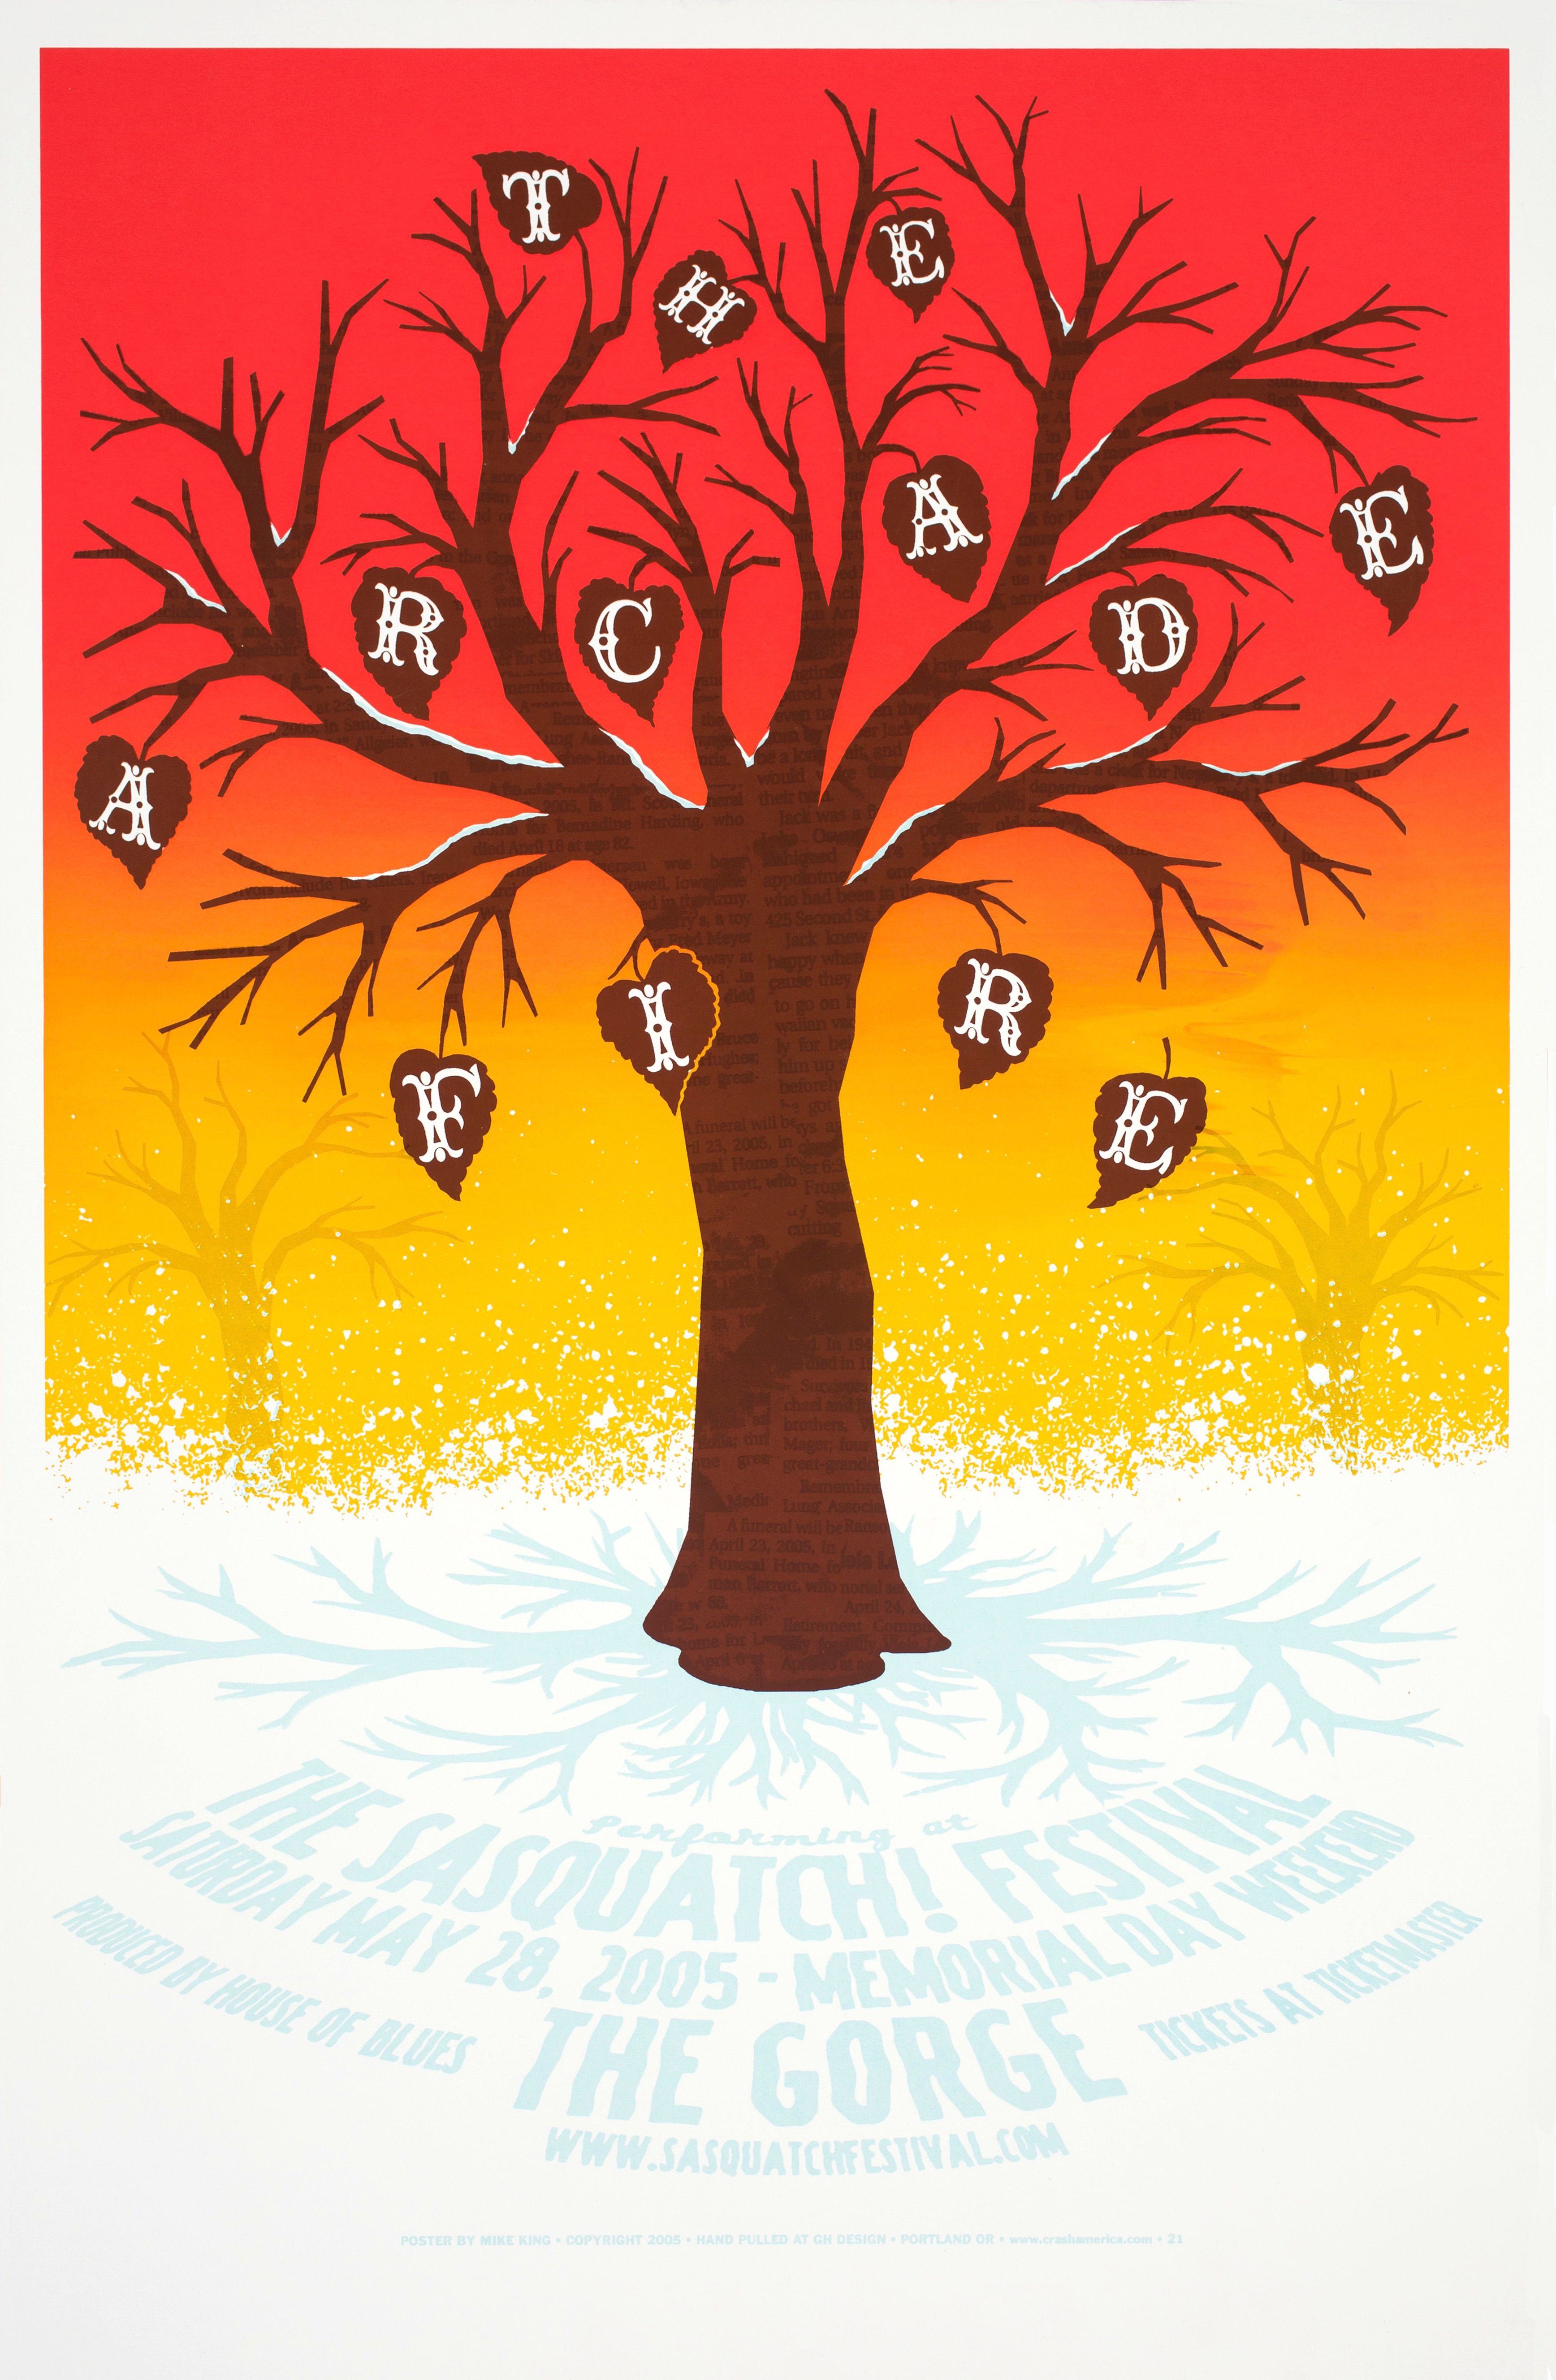 MXP-171.2 Arcade Fire 2005 Gorge  May 28 Concert Poster